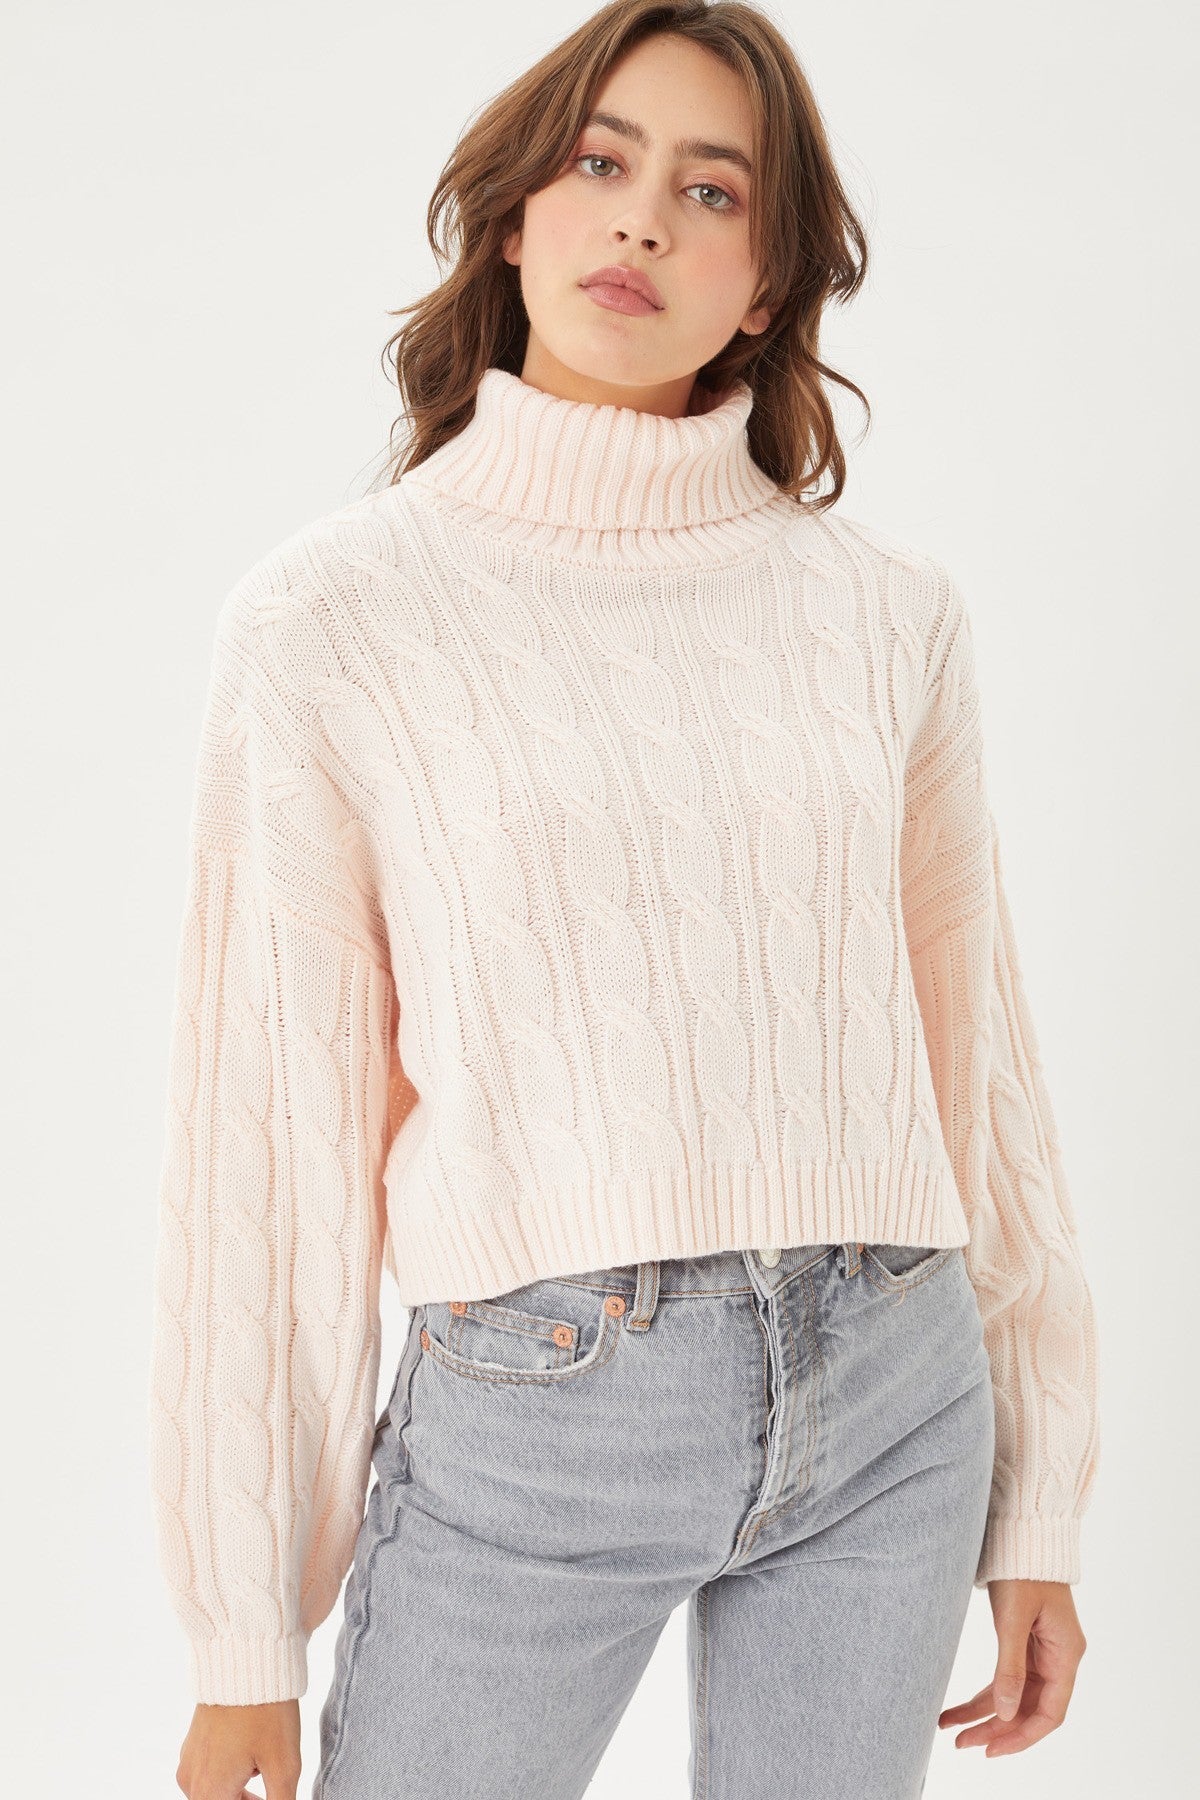 Turtle Neck Loose Fit Cable Knit Sweater - LOLA LUXE